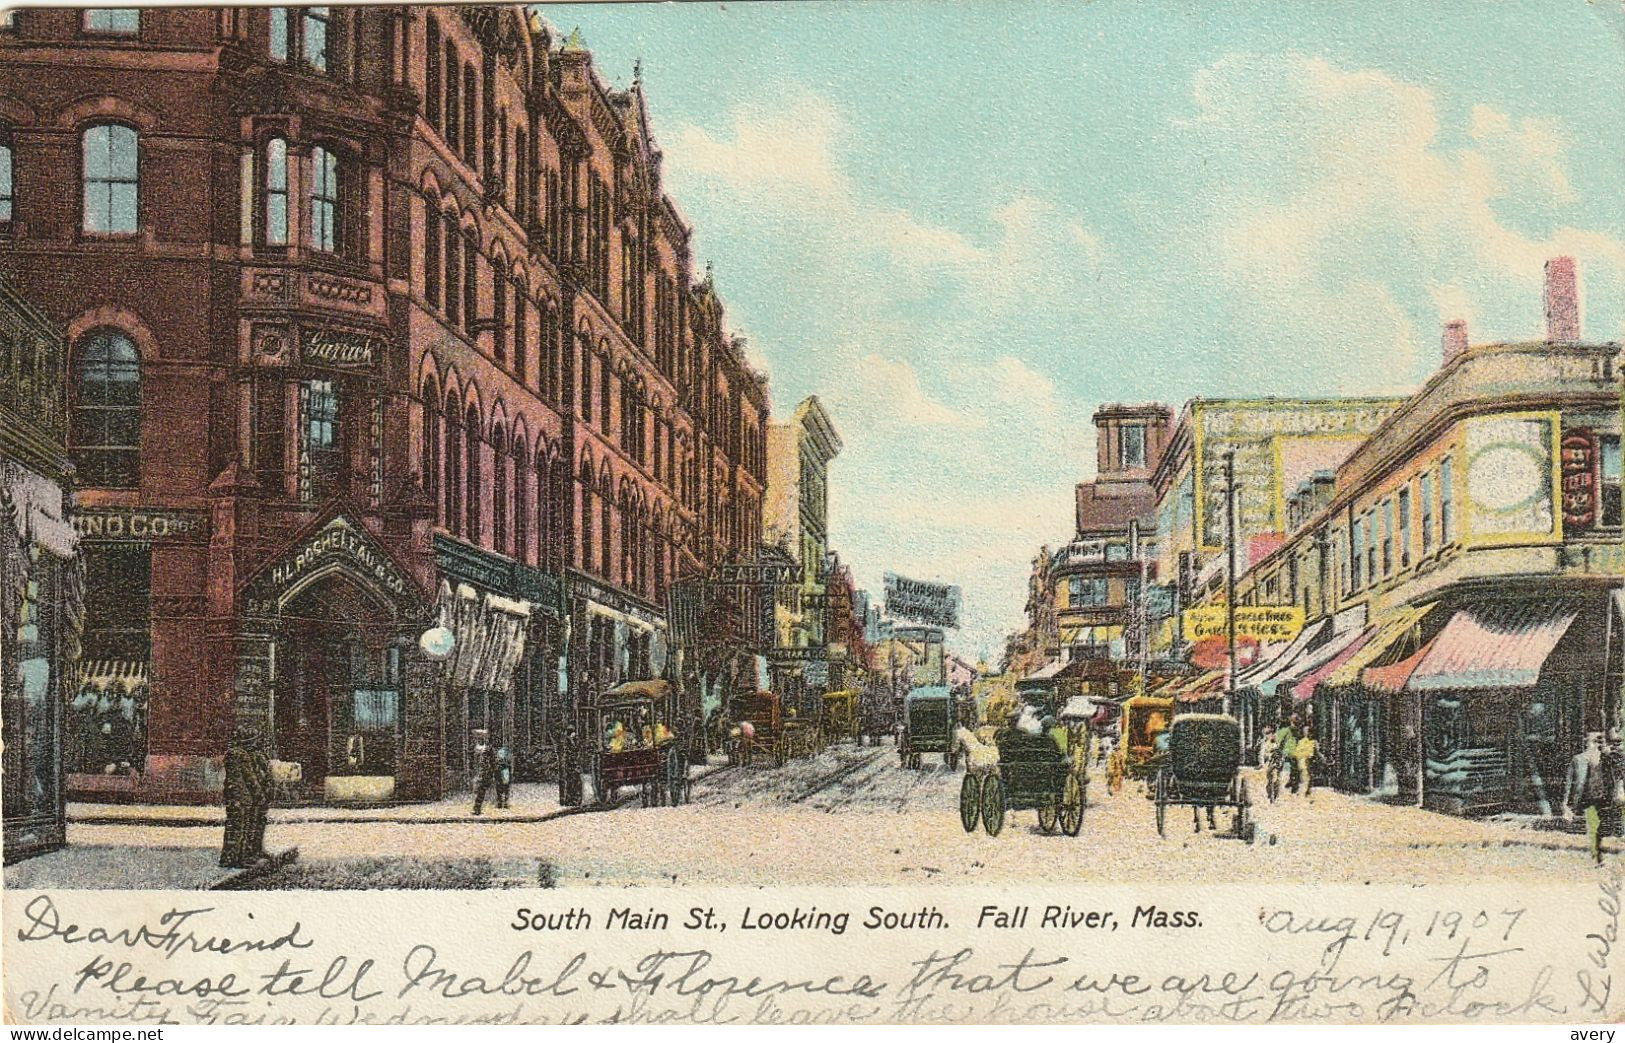 South Main St., Looking South, Fall River, Massachusetts - Fall River